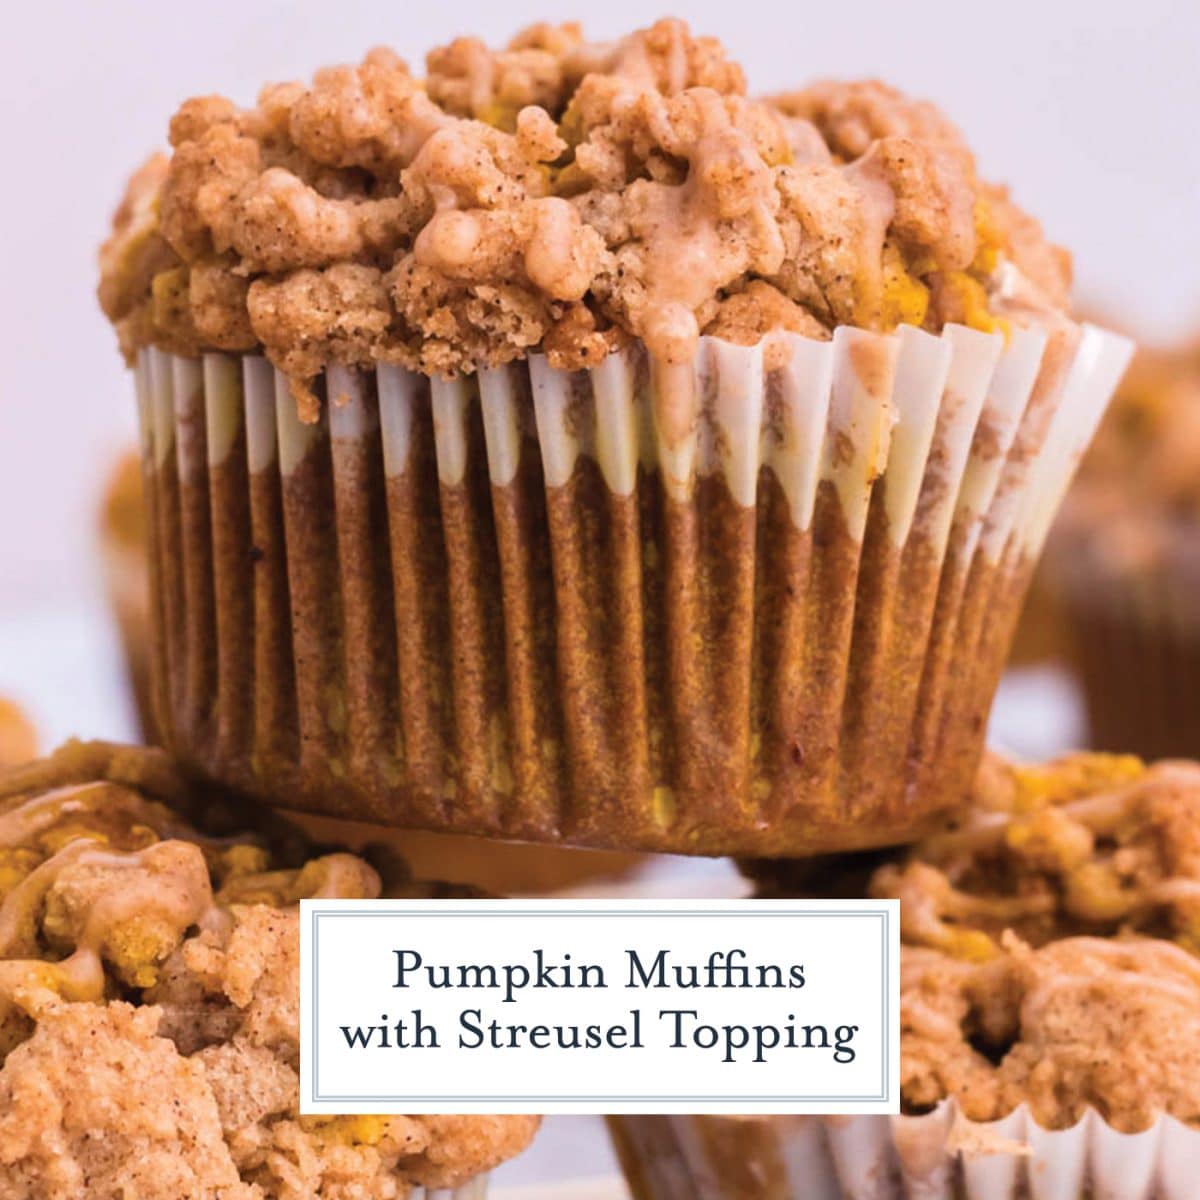 stack of pumpkin muffins with text overlay for facebook